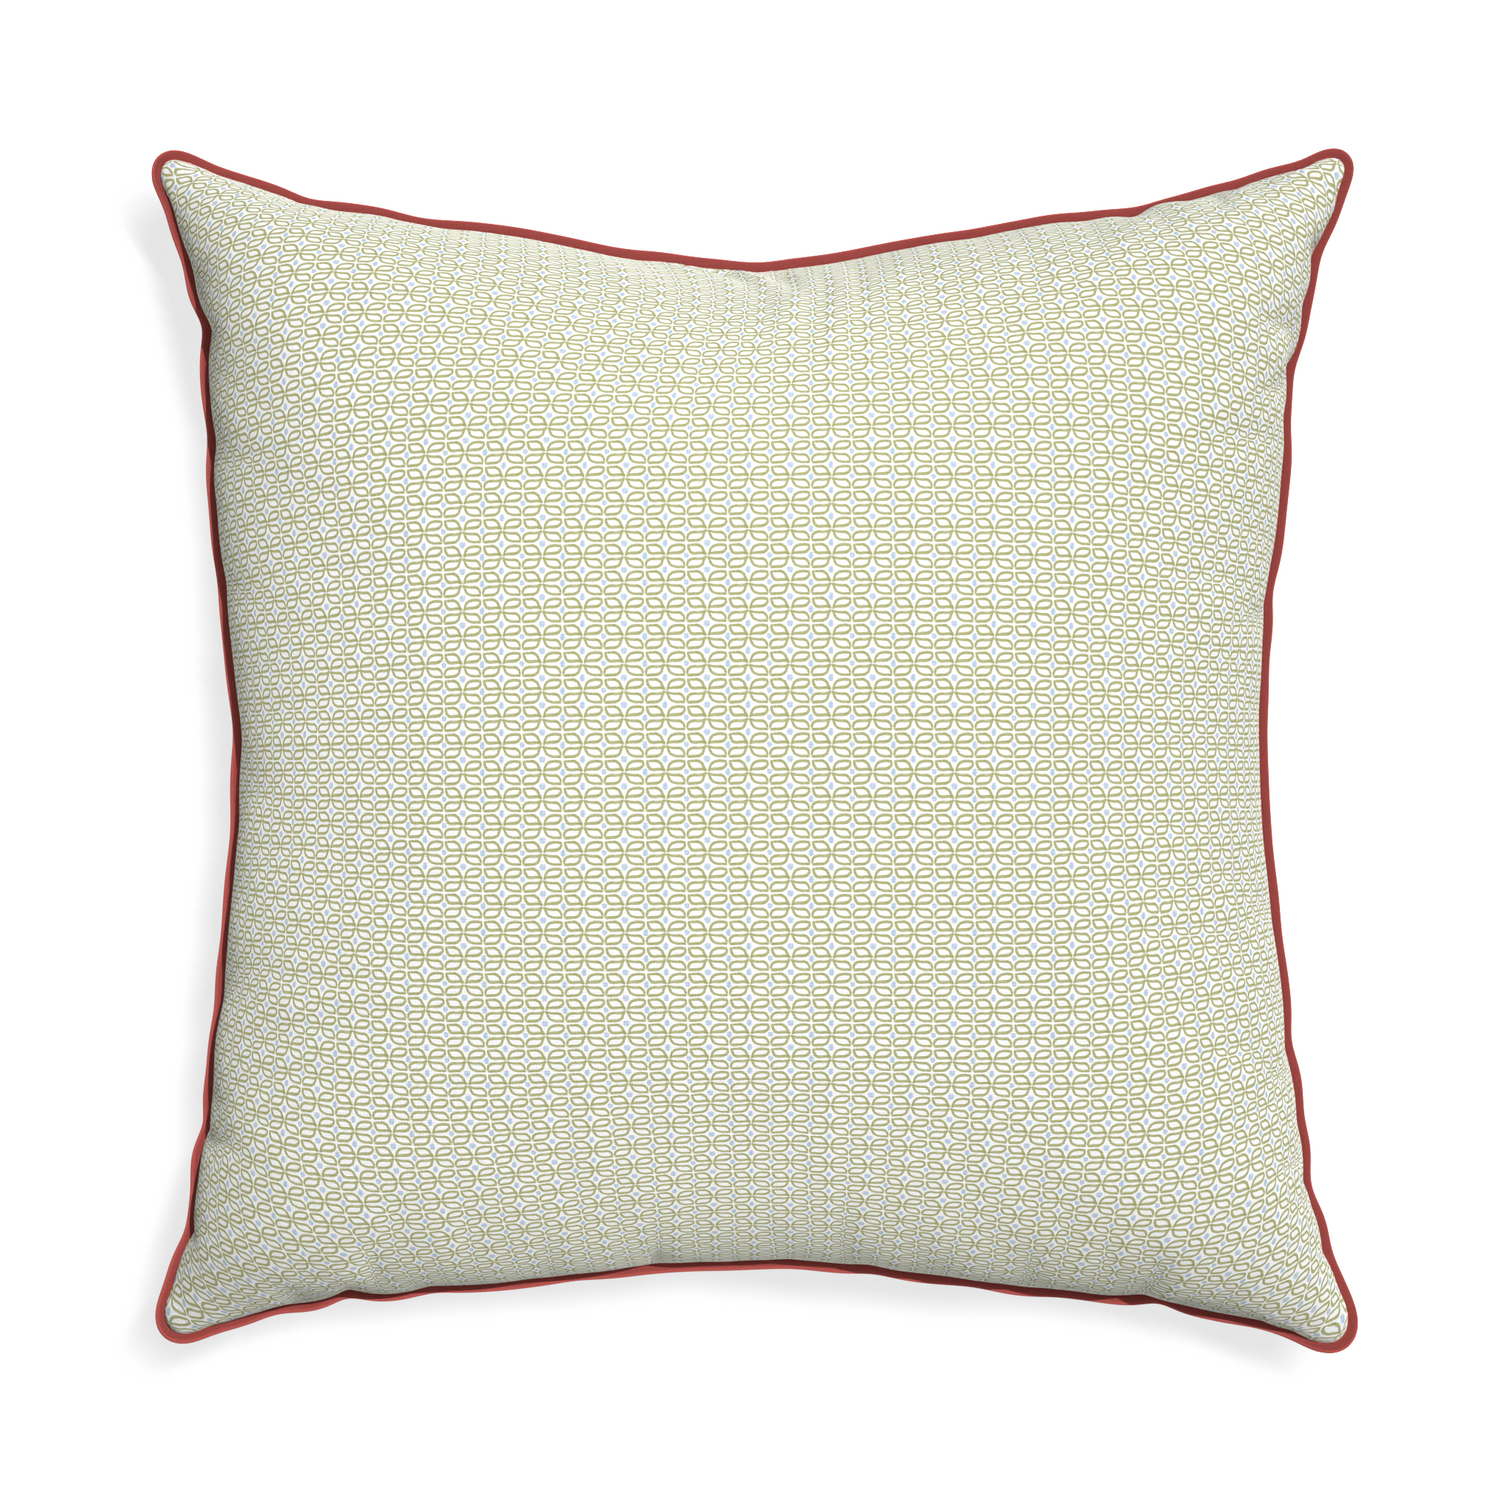 Euro-sham loomi moss custom moss green geometricpillow with c piping on white background